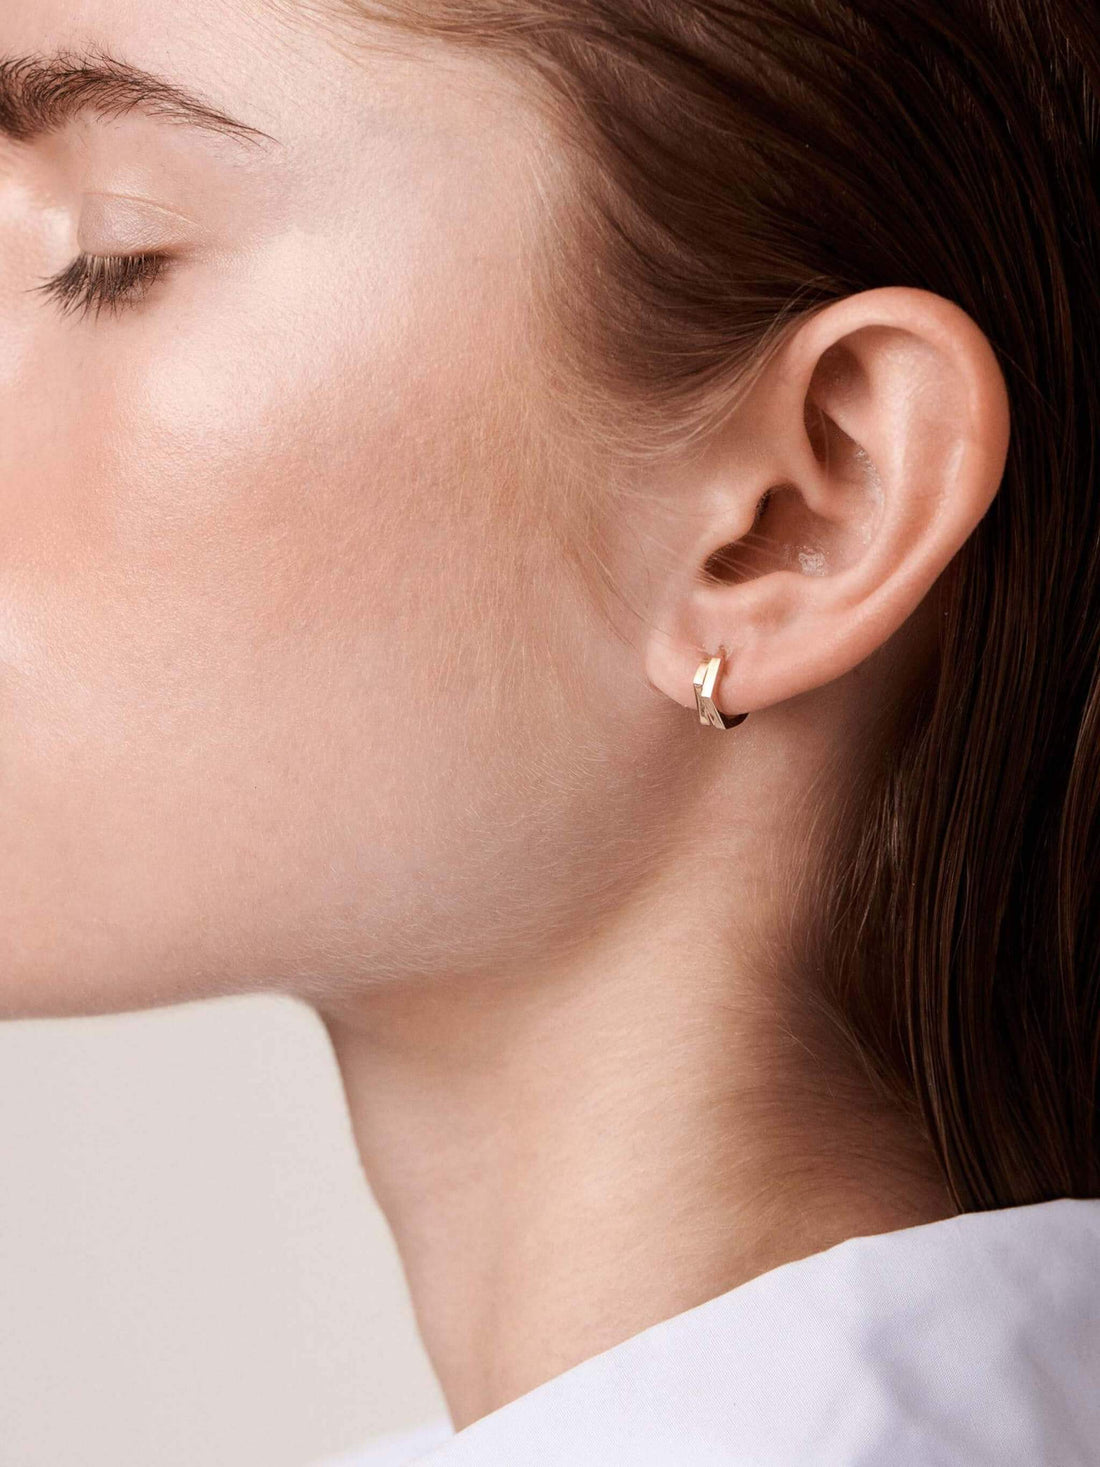 Rose-Tinted Angle Earrings